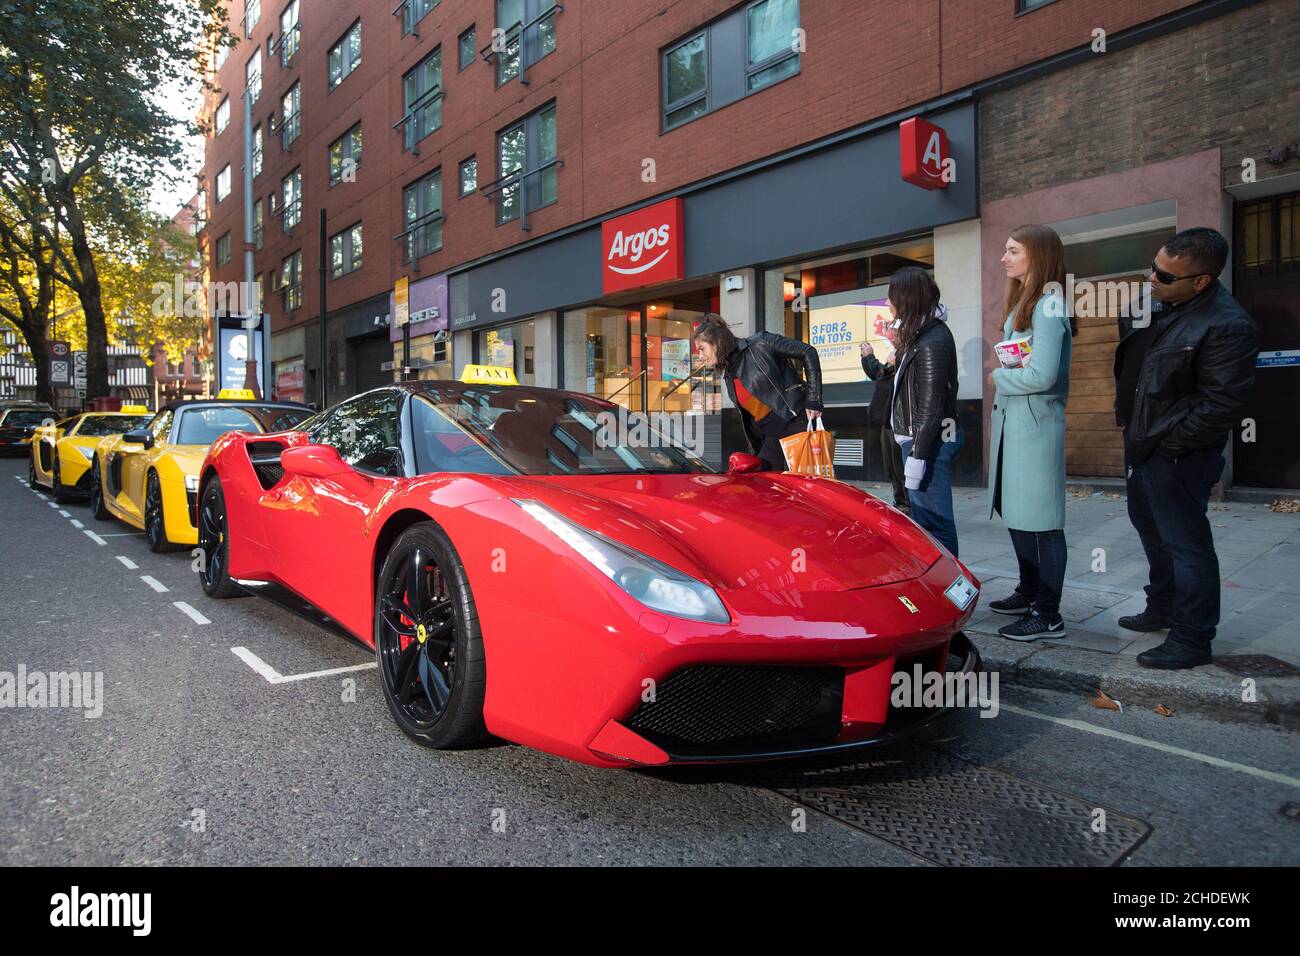 A Ferrari 488 Spyder lines up outside Argos, alongside an Audi R8 V10 Plus Spider and a Lamborghini Aventador, waiting to chauffeur home customers who've pre-ordered a copy of the highly-anticipated Forza Horizon 4, which has been launched today by Xbox One. Stock Photo